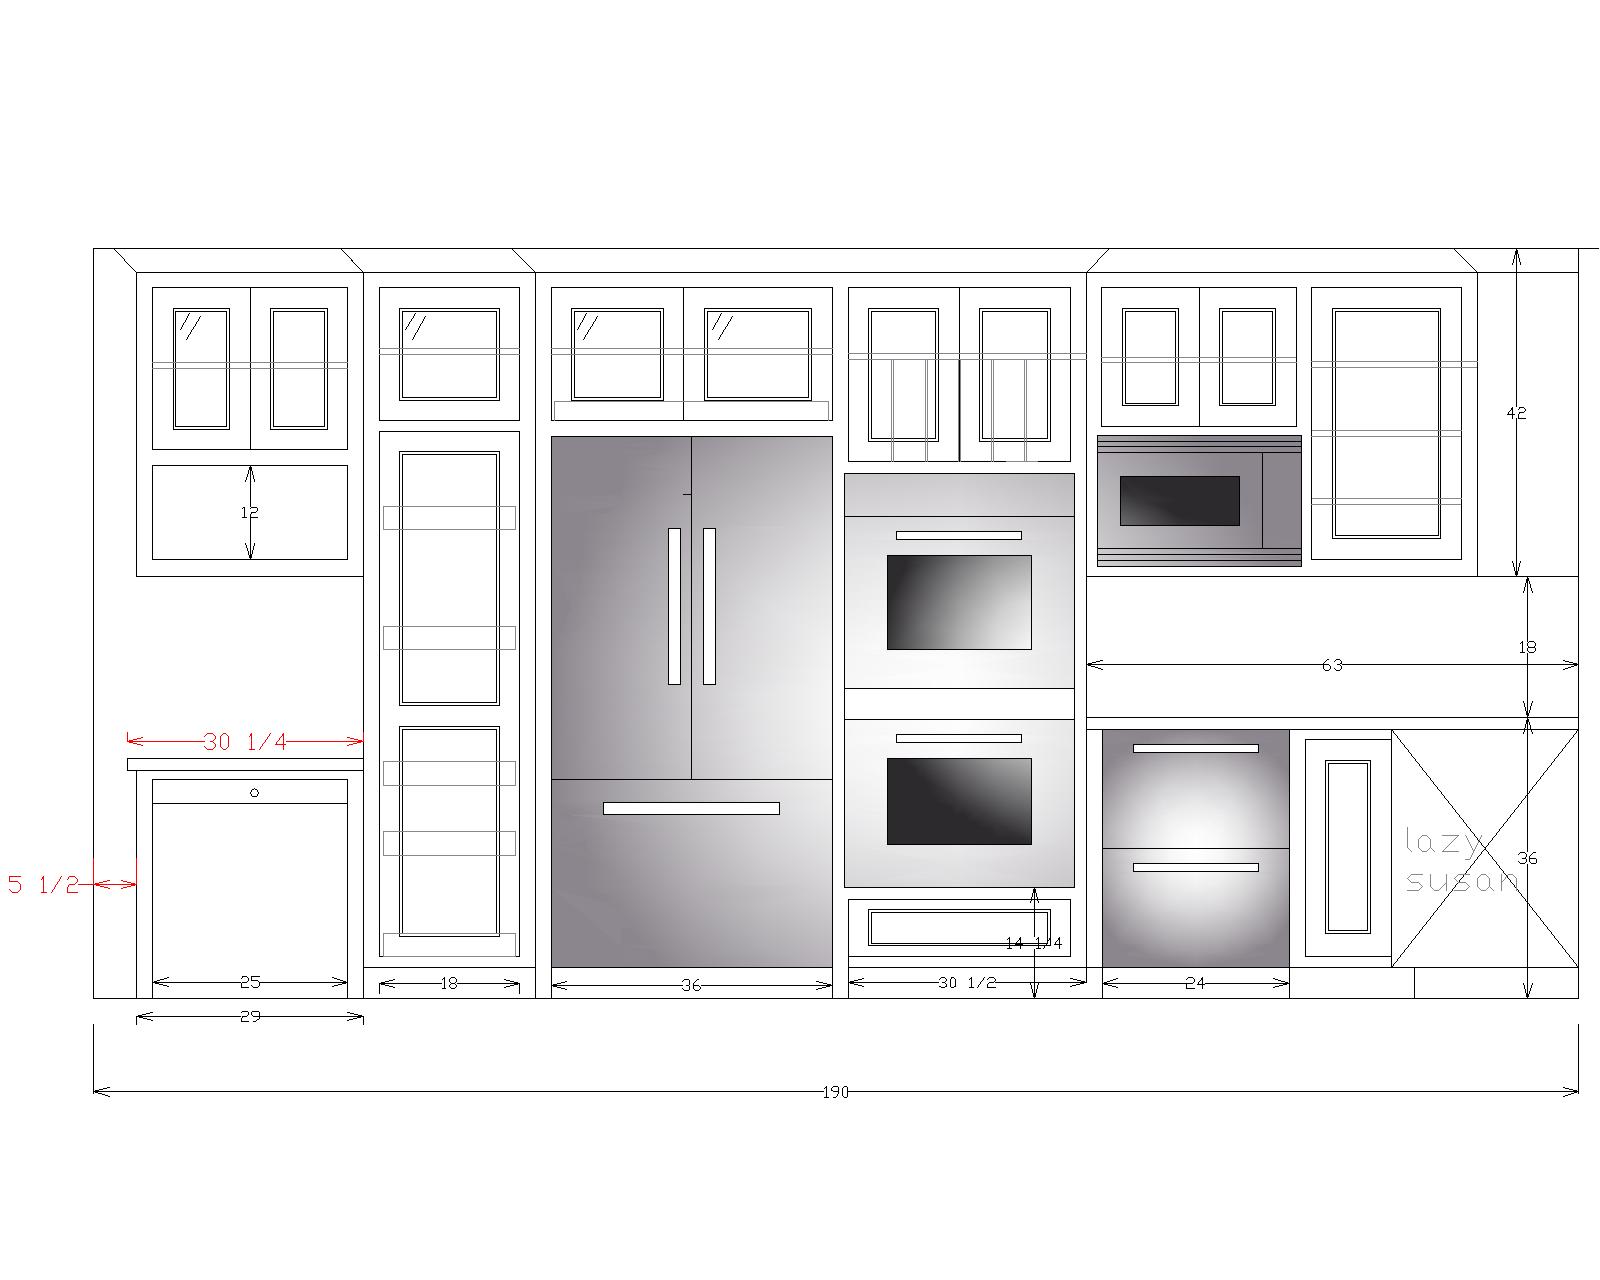 The layout of the new kitchen.